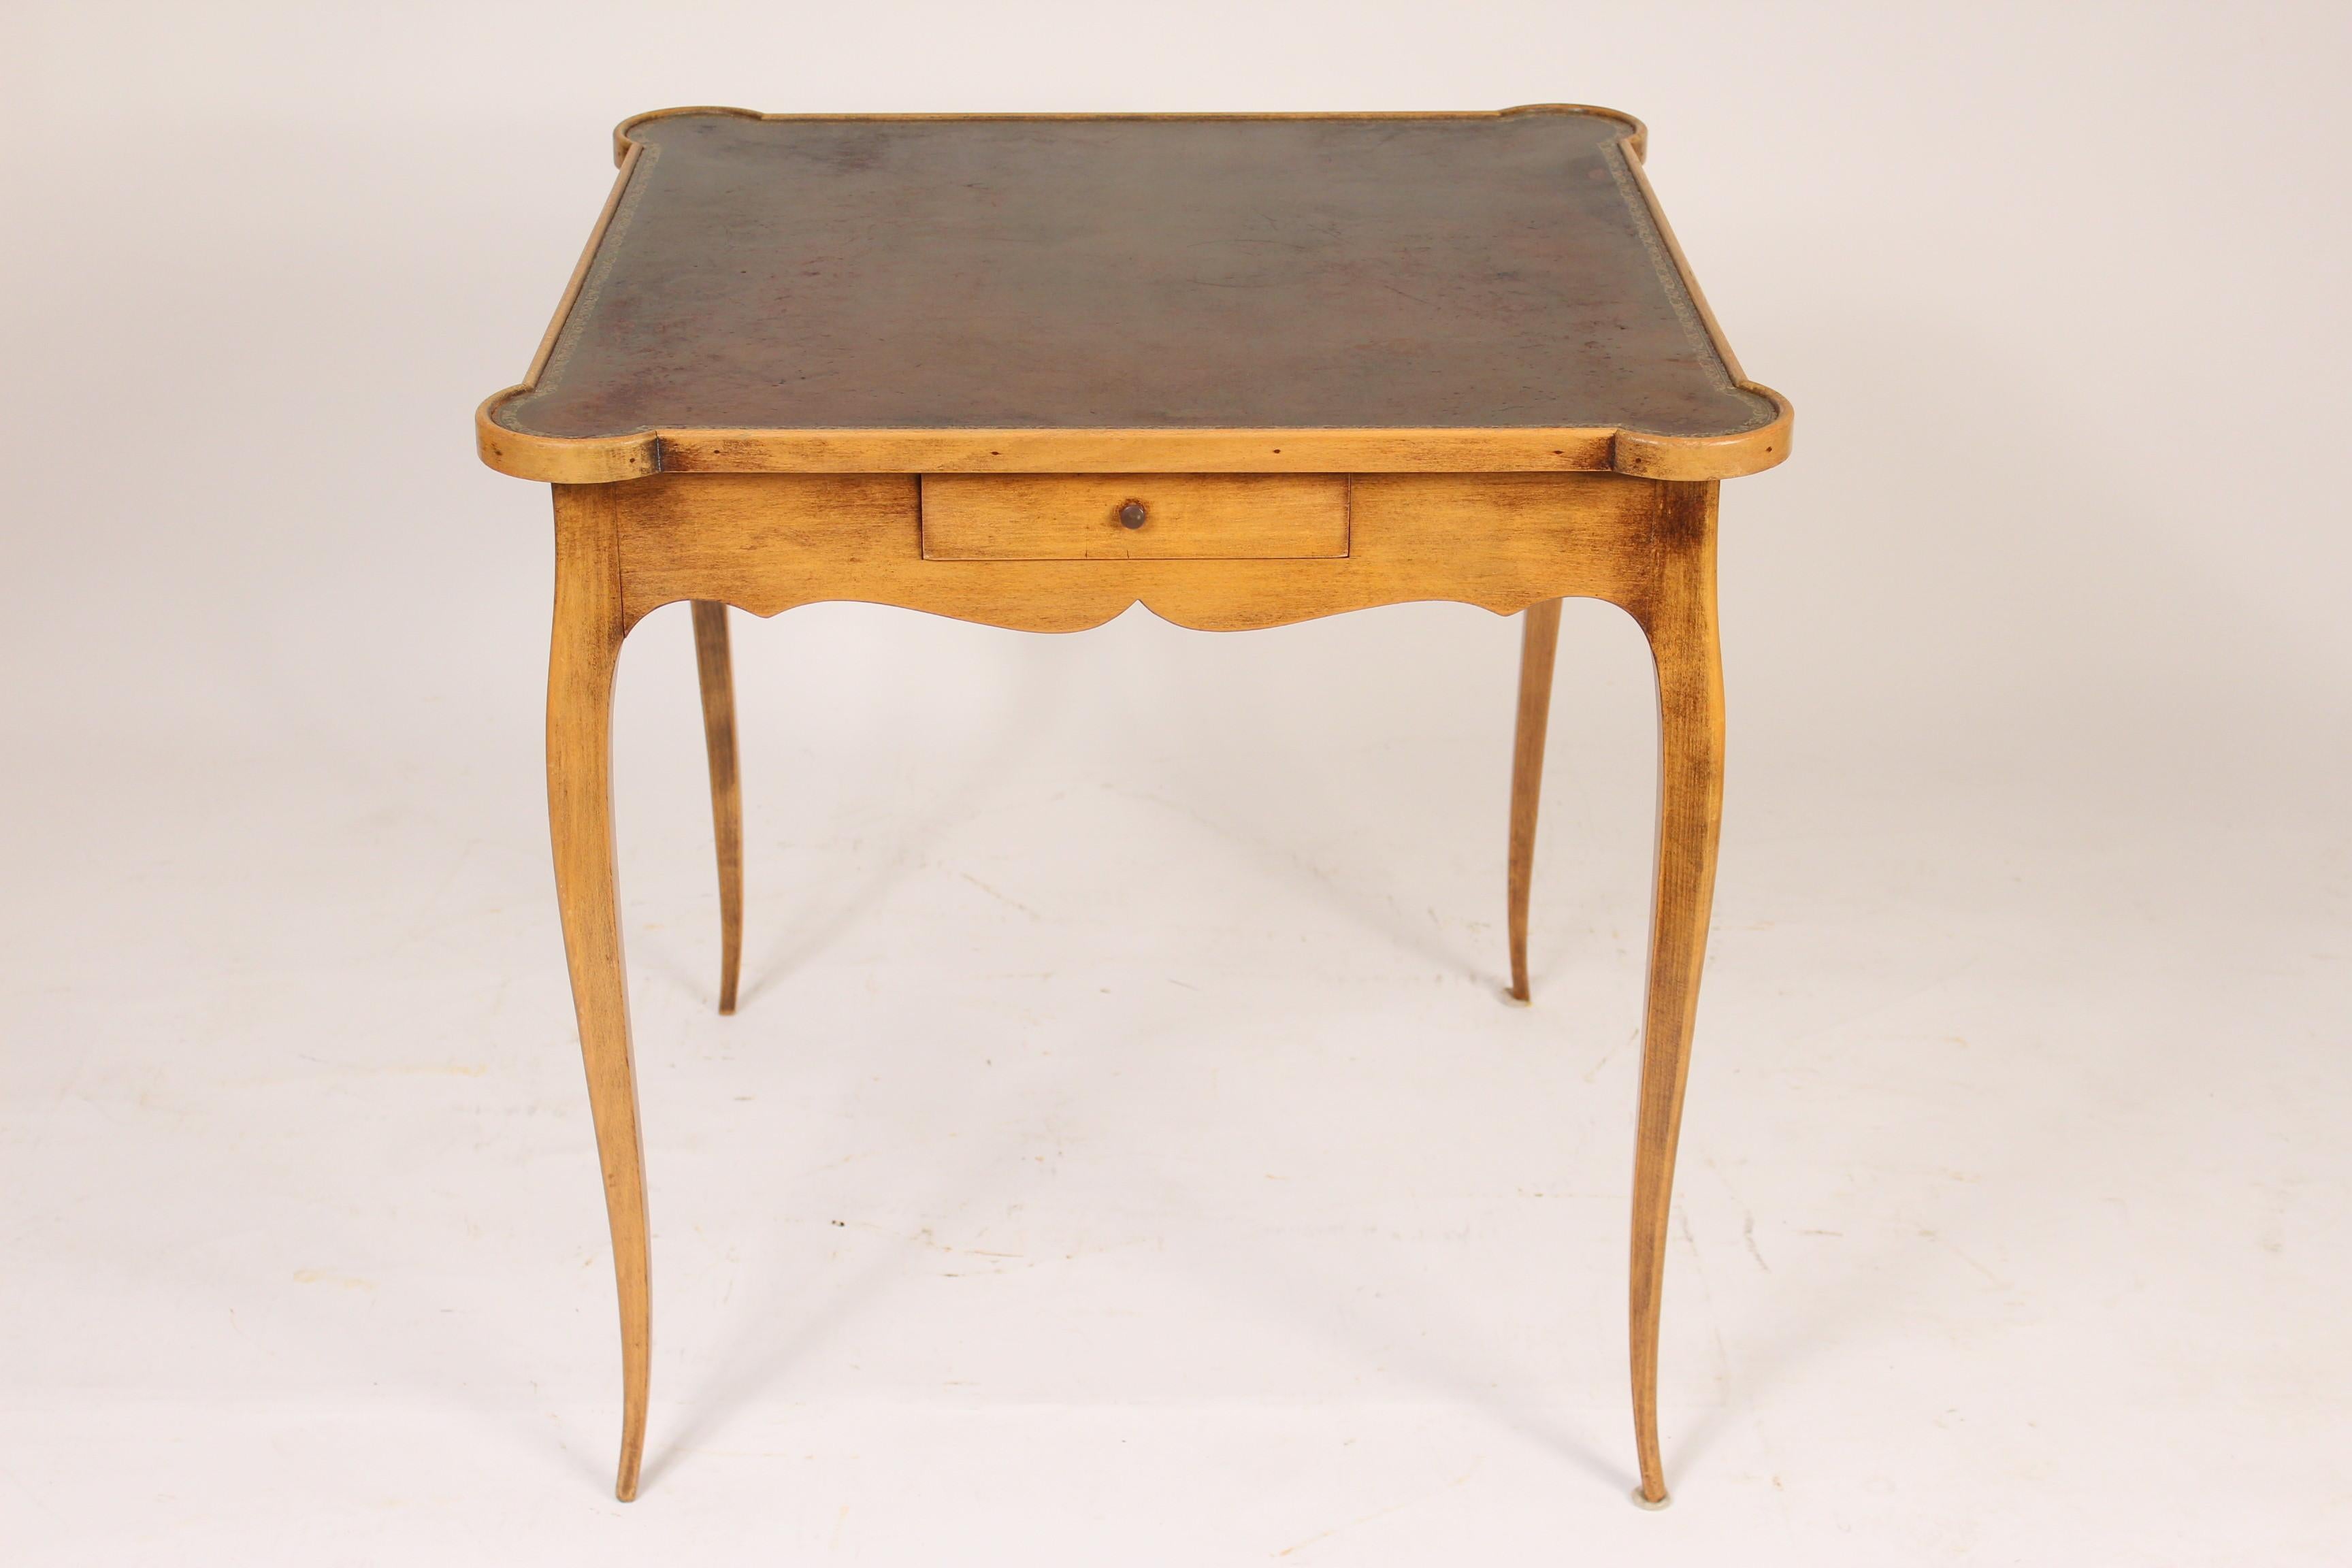 Louis XV Provincial style fruitwood games table with a tooled leather top, mid-20th century.